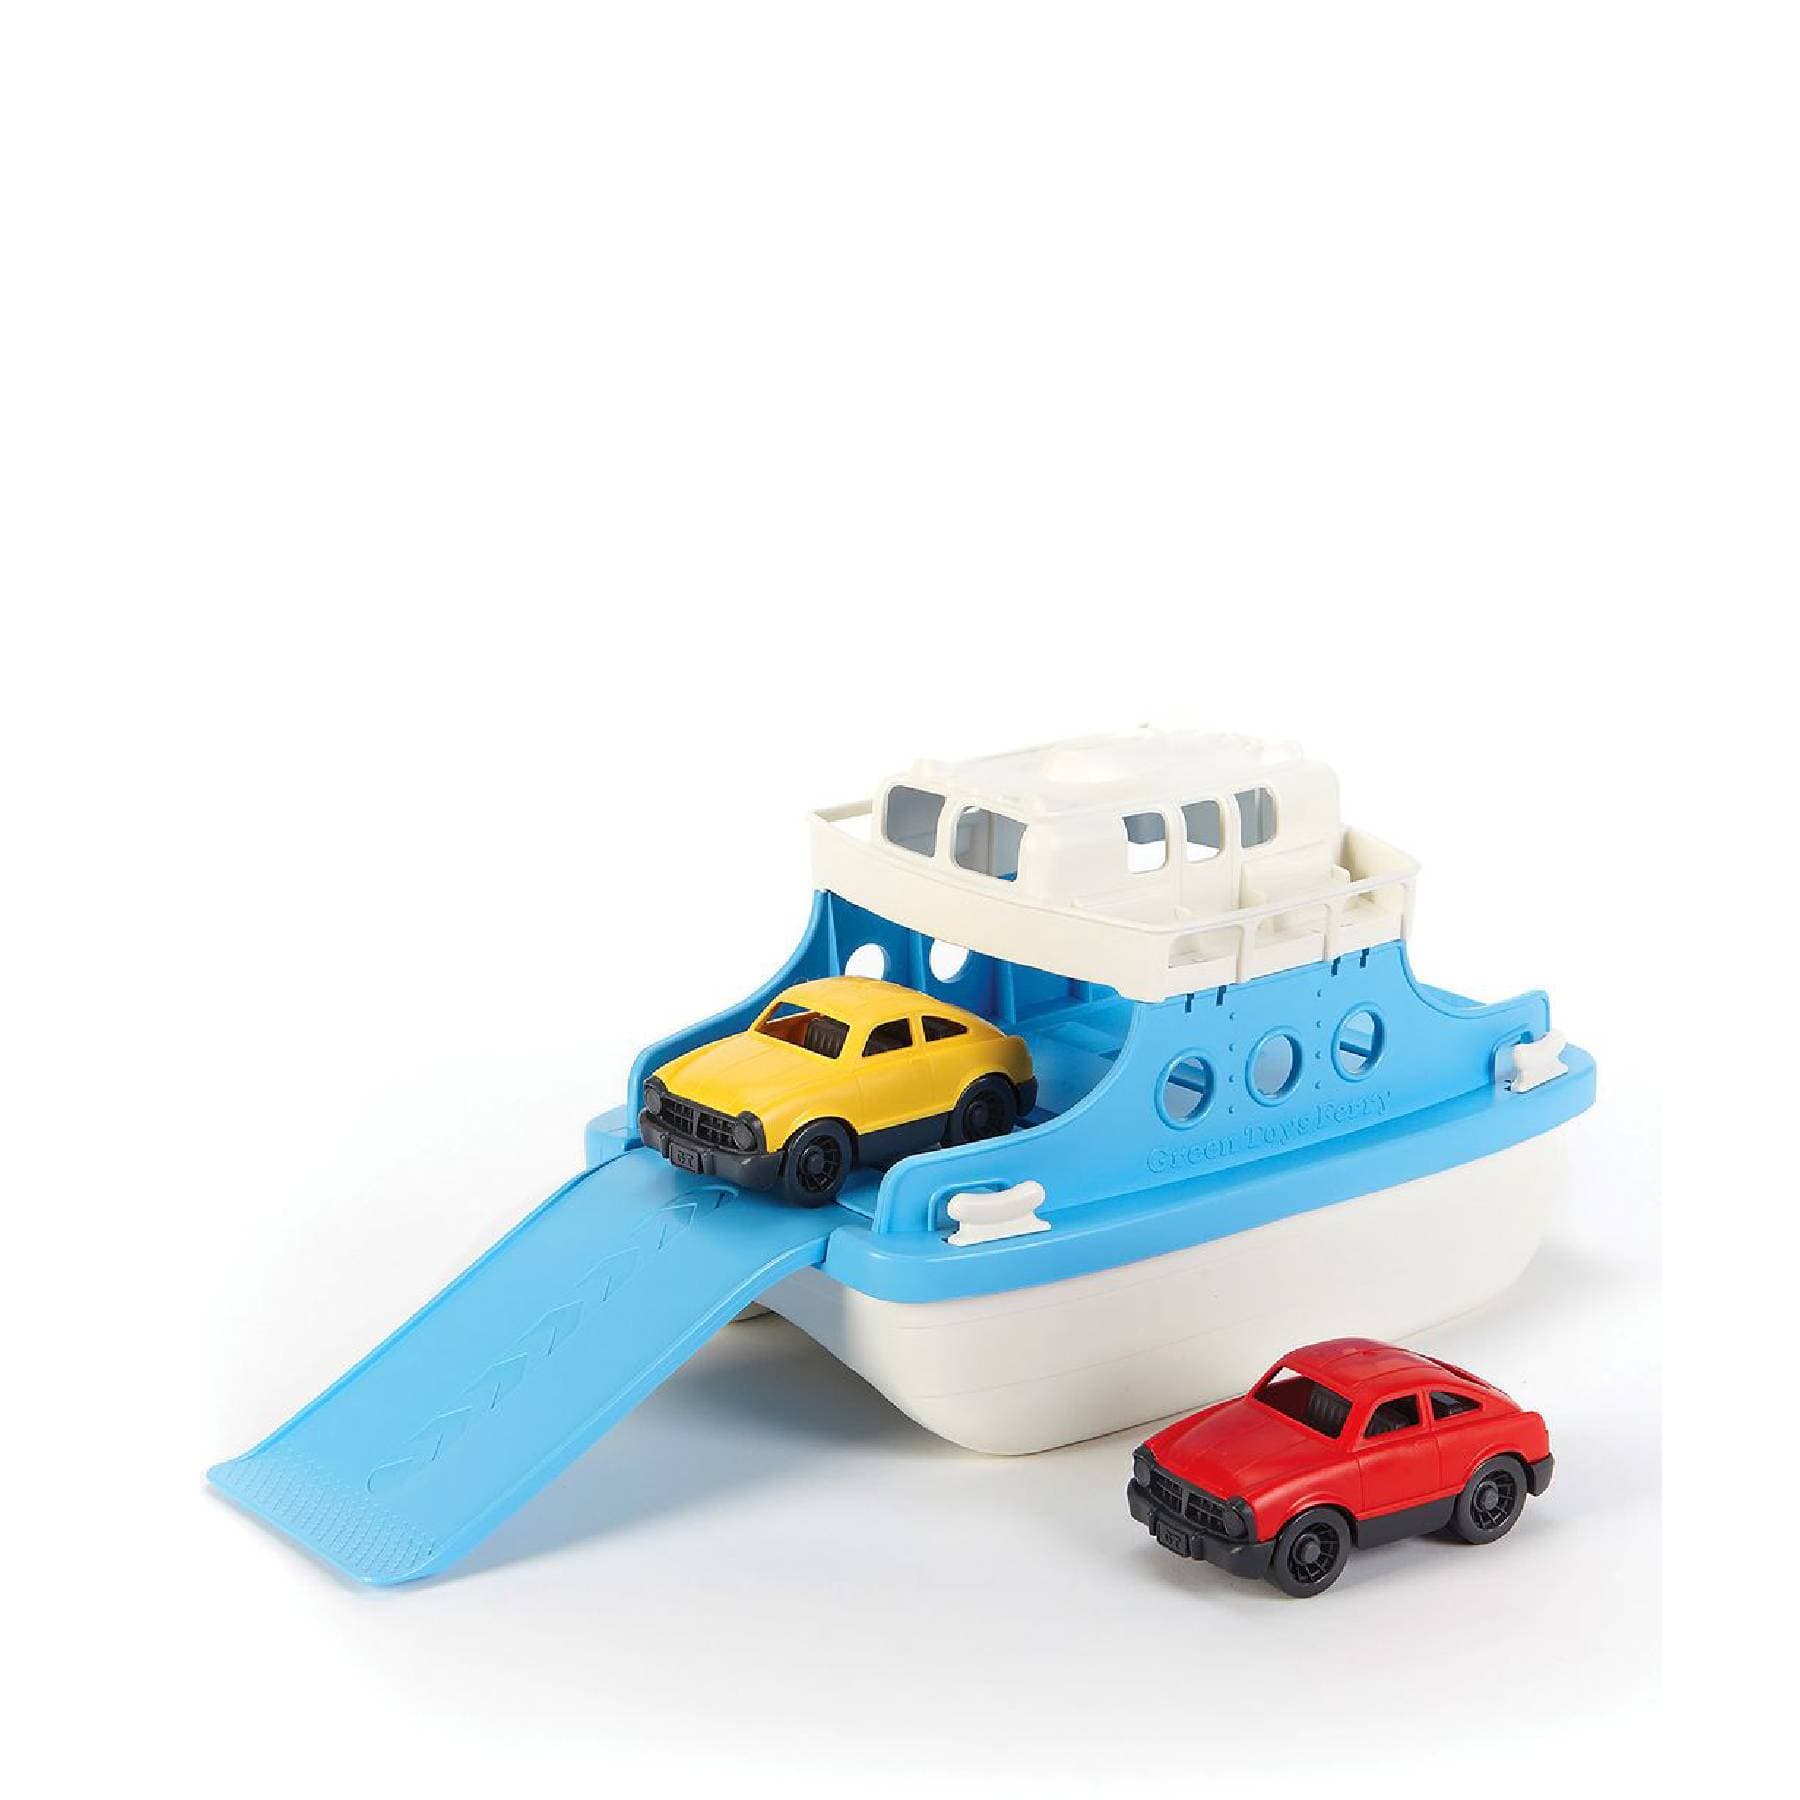 Ferry boat with cars